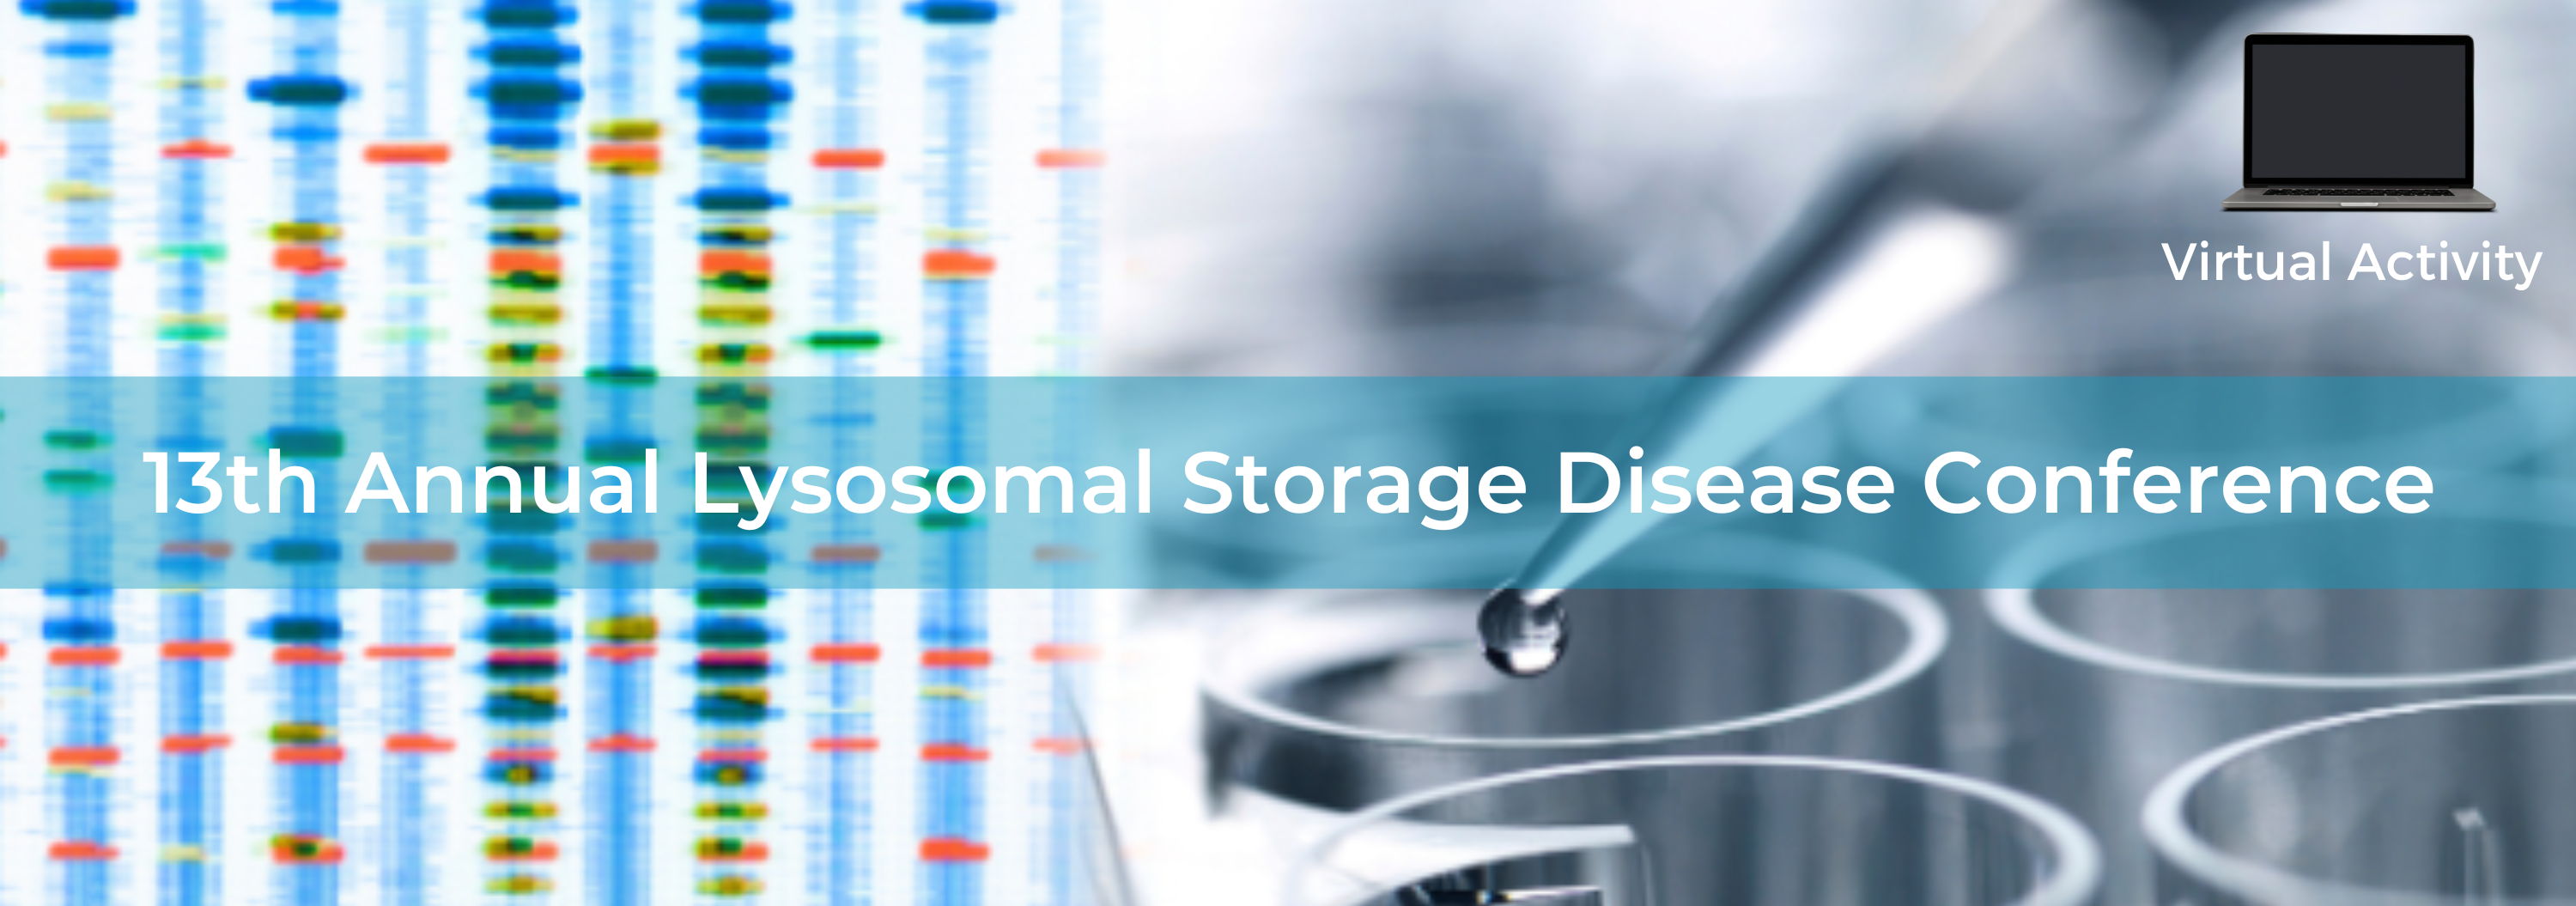 13th Annual Lysosomal Storage Disease Conference Banner